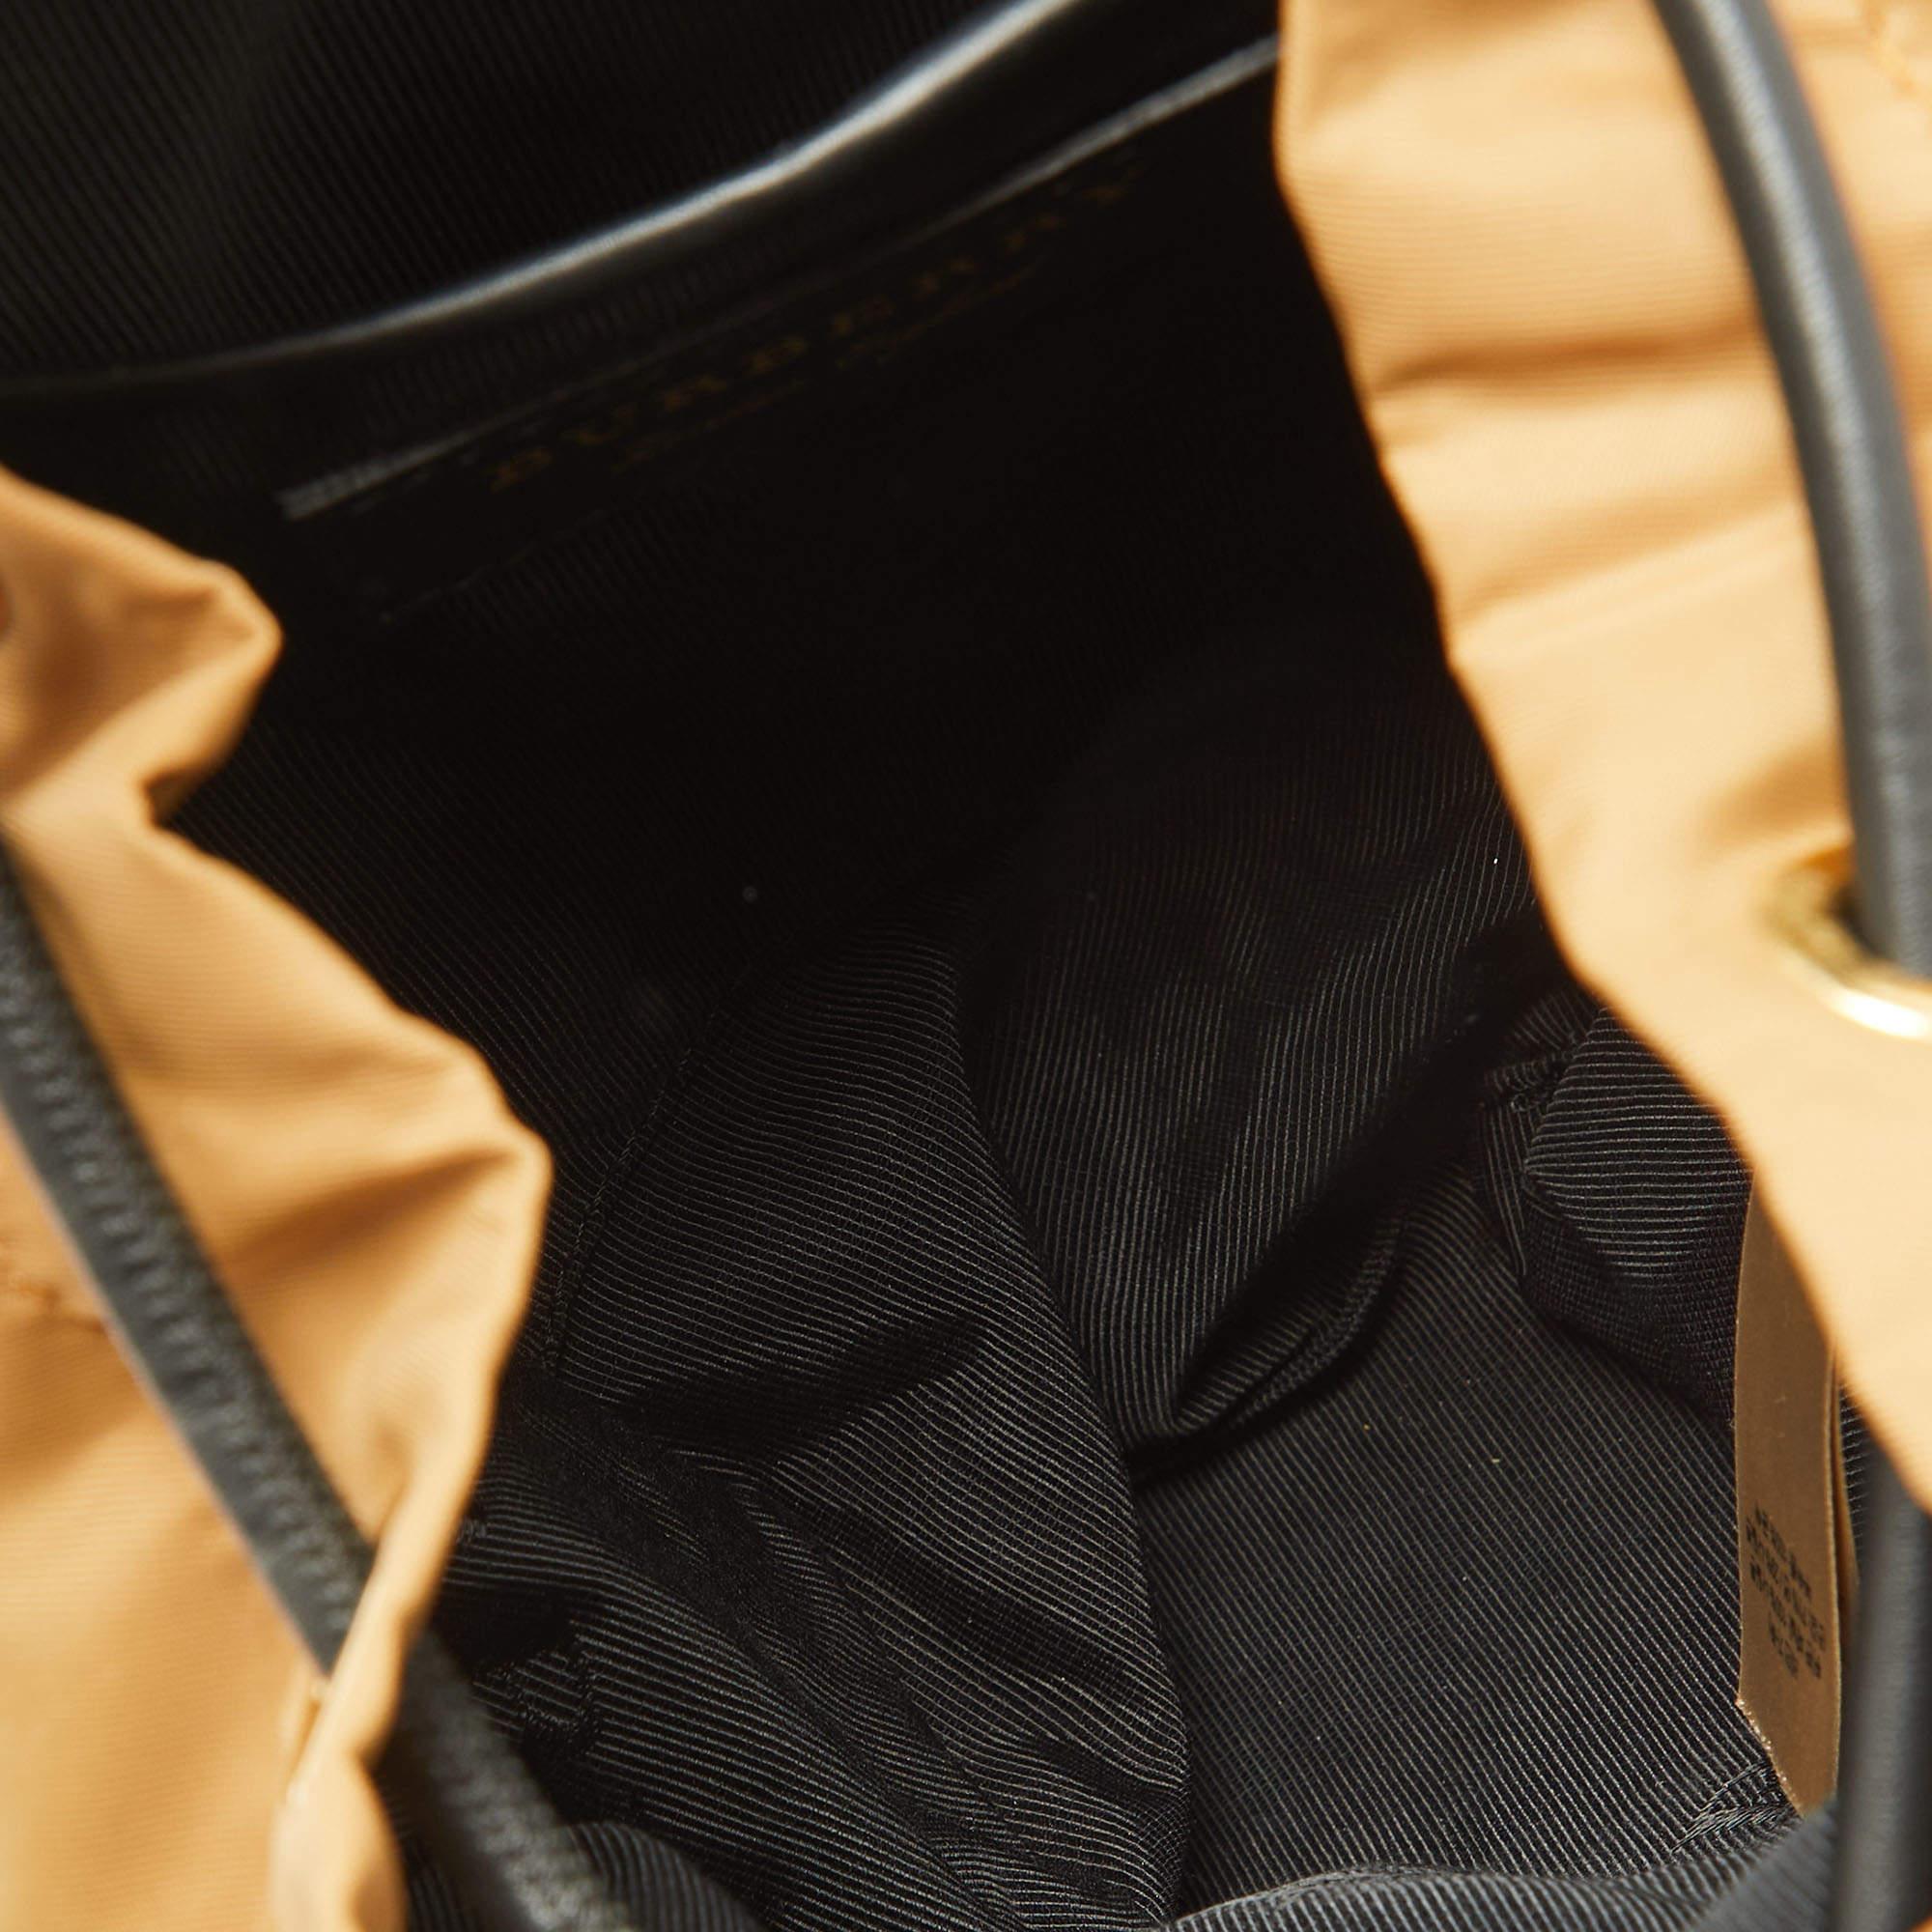 Burberry Beige/Black Nylon and Leather Small Rucksack Backpack 6